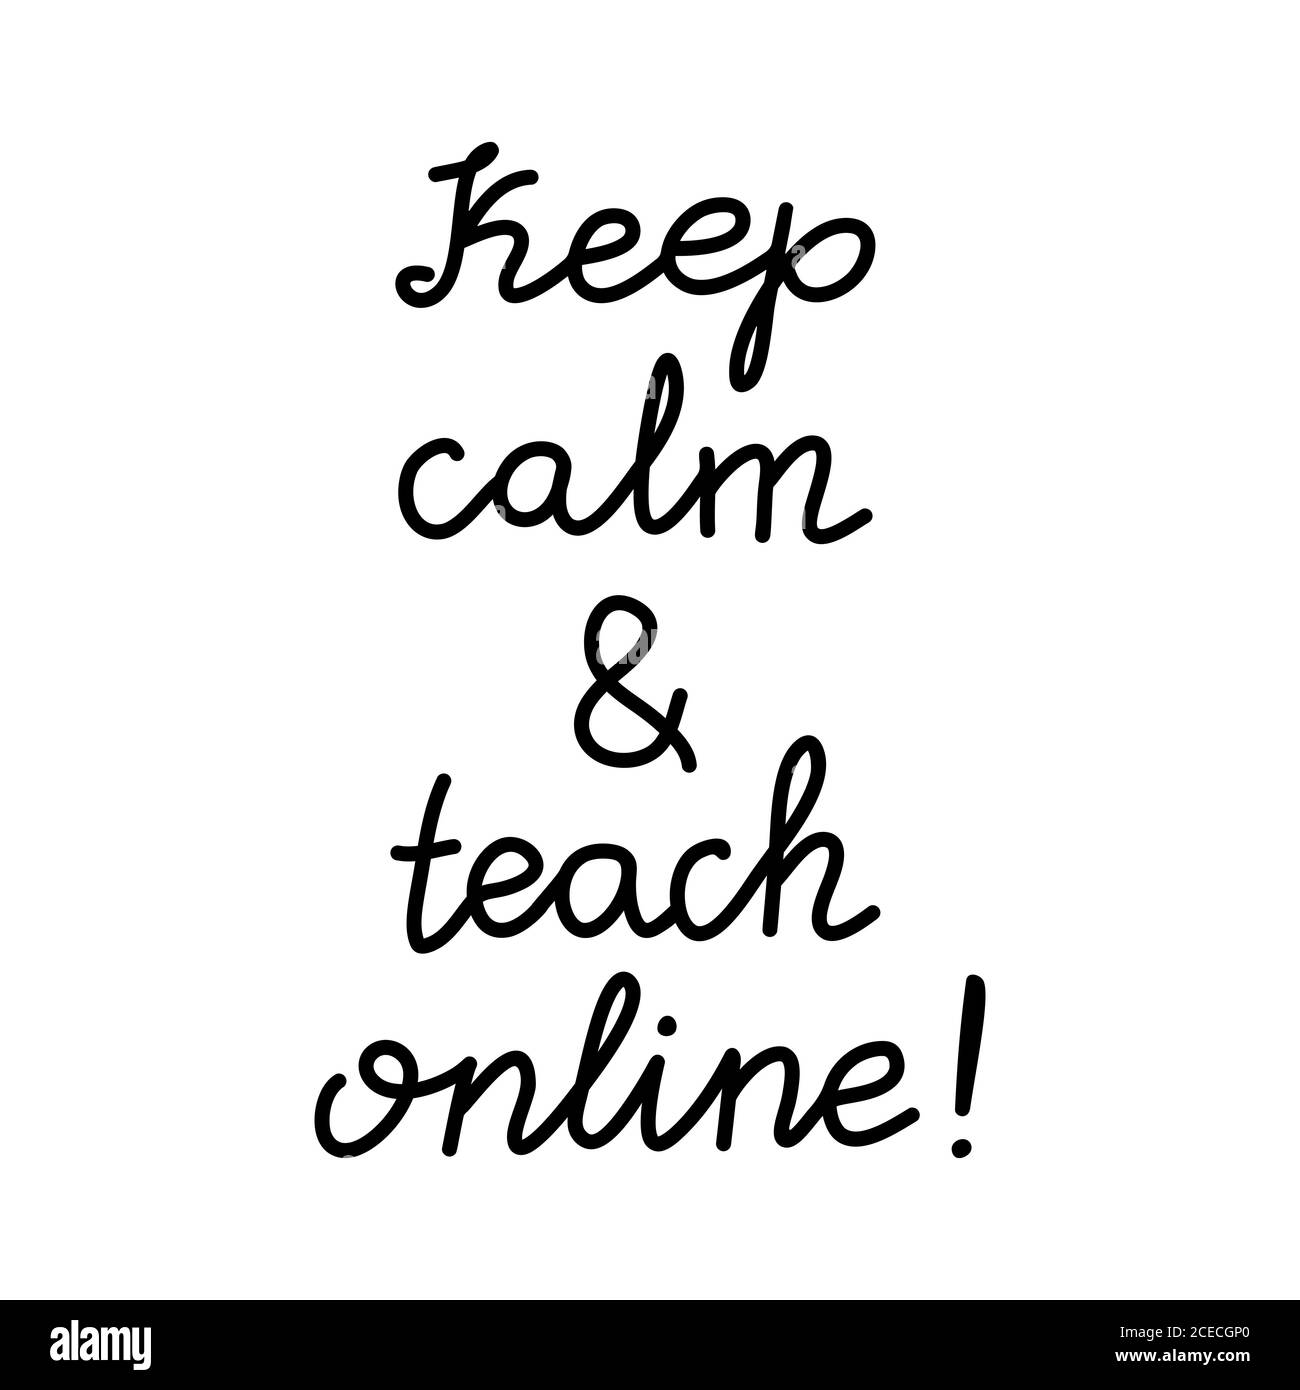 Keep calm and teach online. Education quote. hildish handwriting. Isolated on white background. Vector stock illustration. Stock Vector